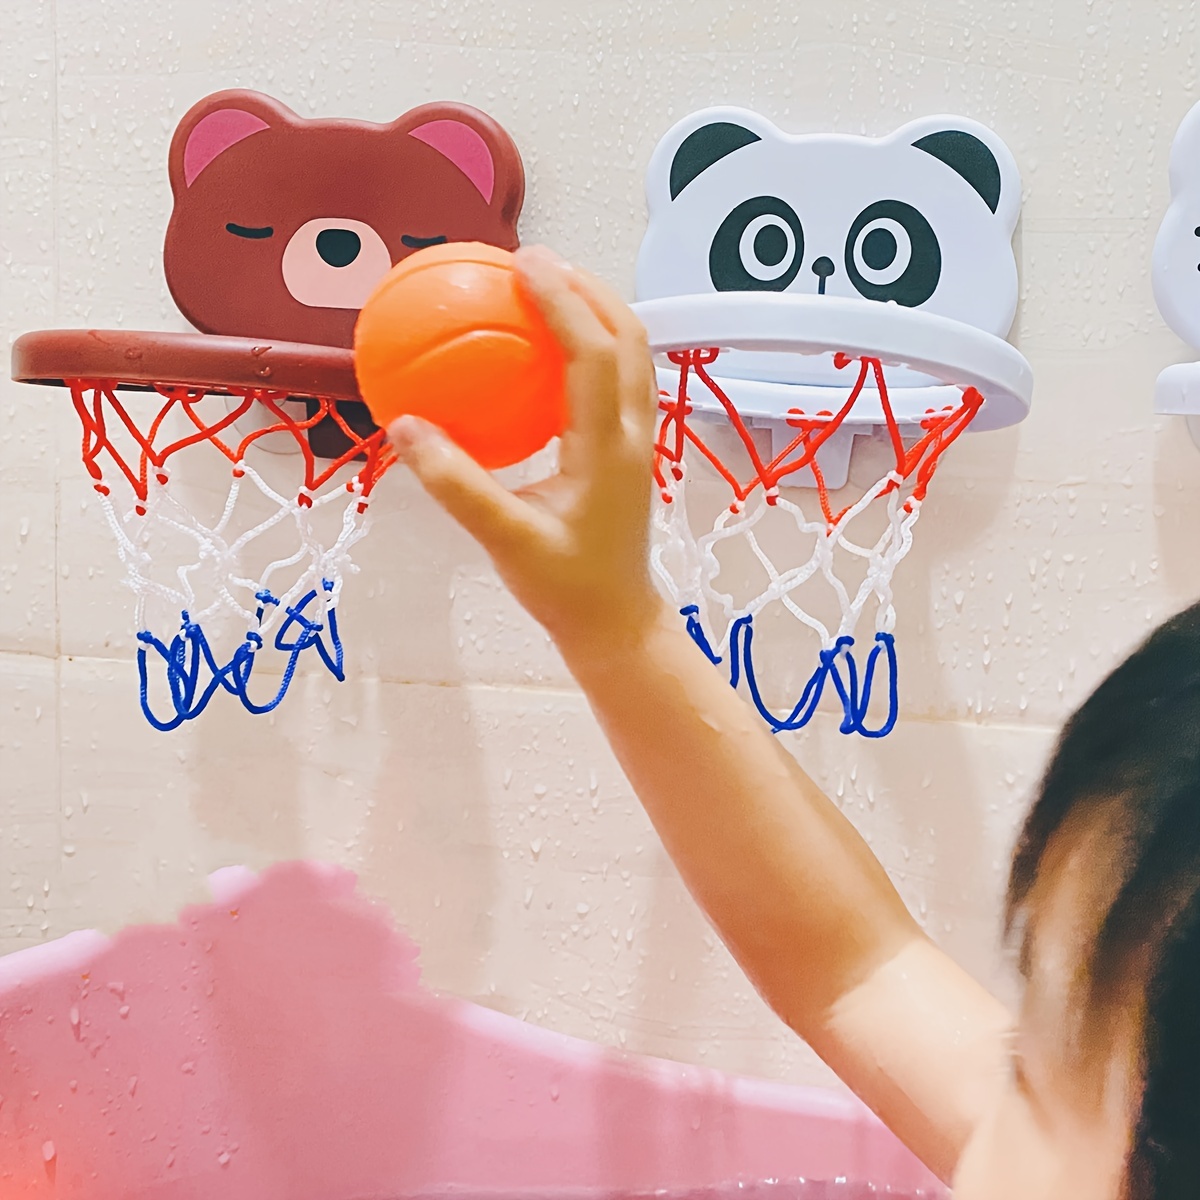 

Bath Toy Suction Cup Shooting Basketball Holder With 3 Balls Bathroom, Bathtub Shower Toy, Water Play Game Toy